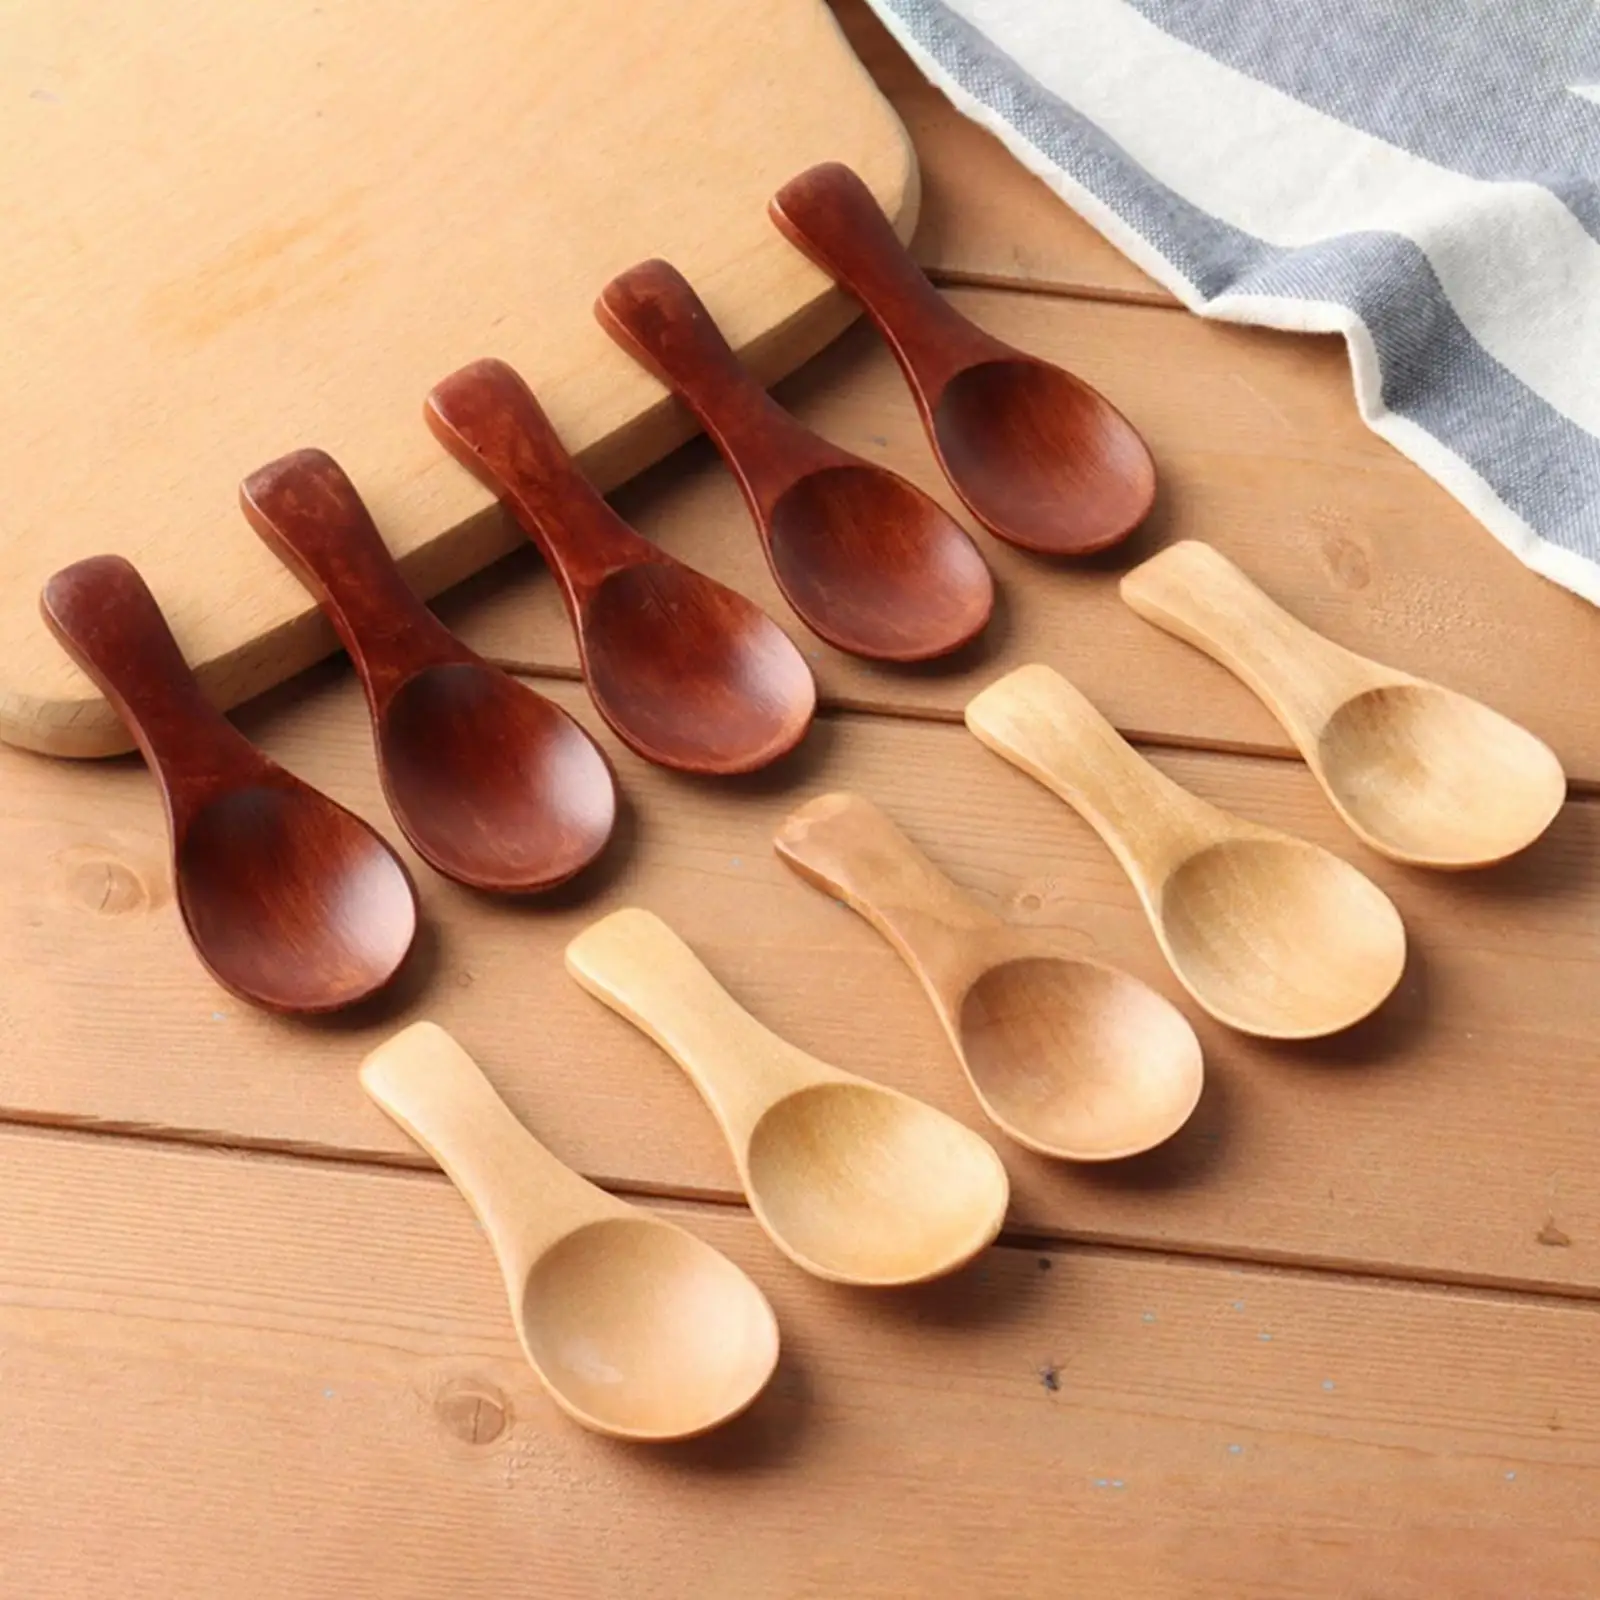 10 Pieces Condiments Spoon Serving Utensils Kitchen Supplies Small Wooden Spoons for Spices Honey Seasoning Sugar Condiments